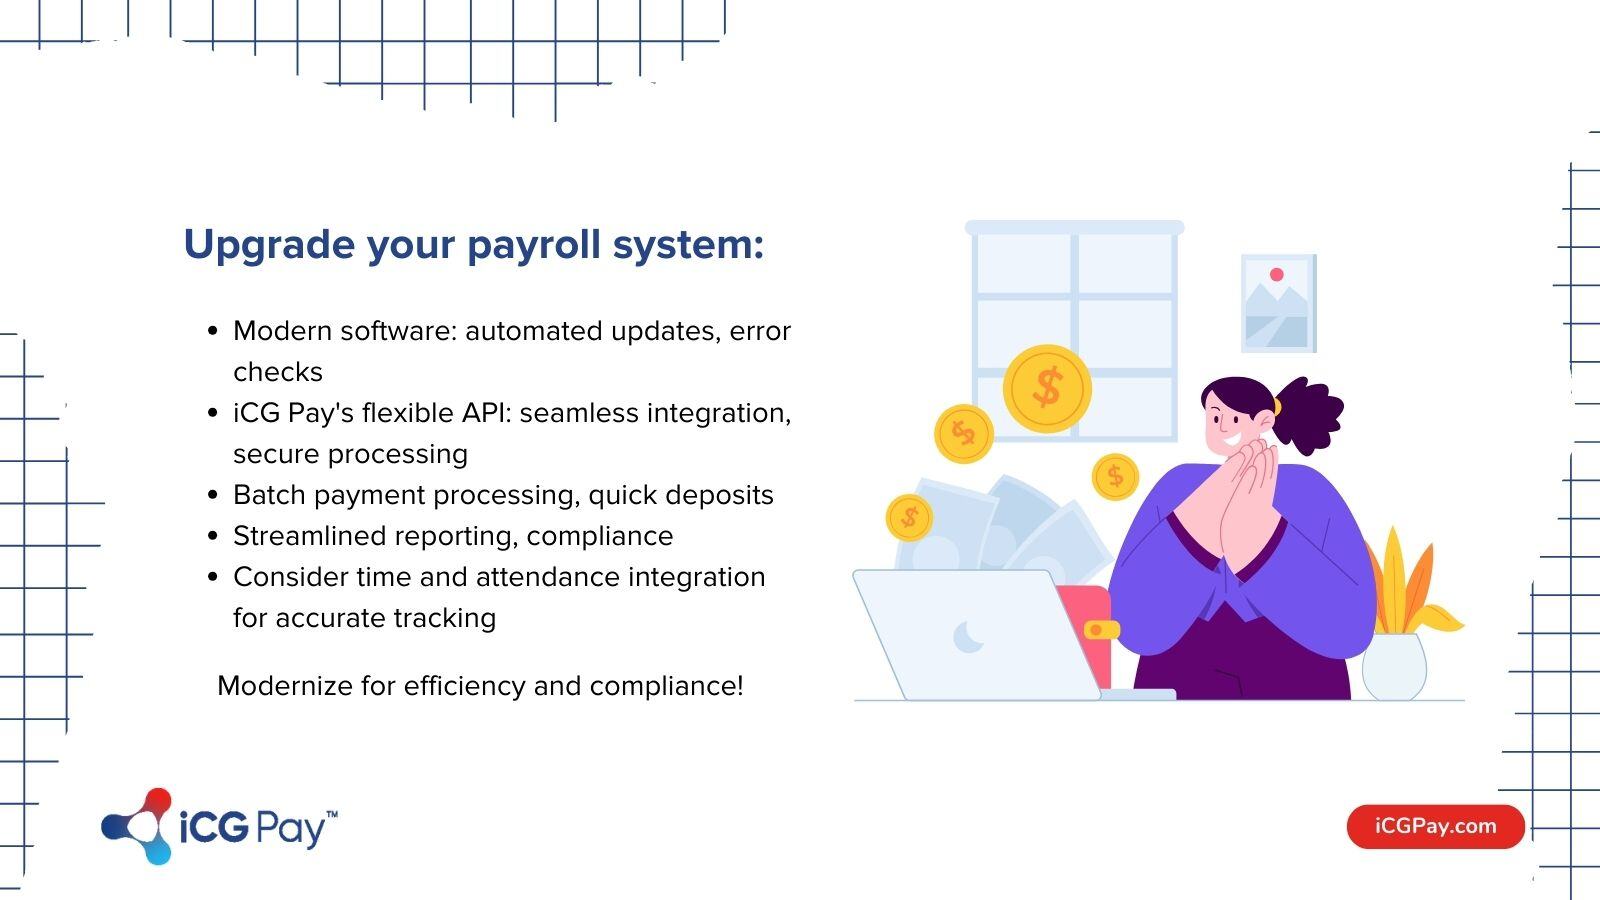 Upgrade your payroll system